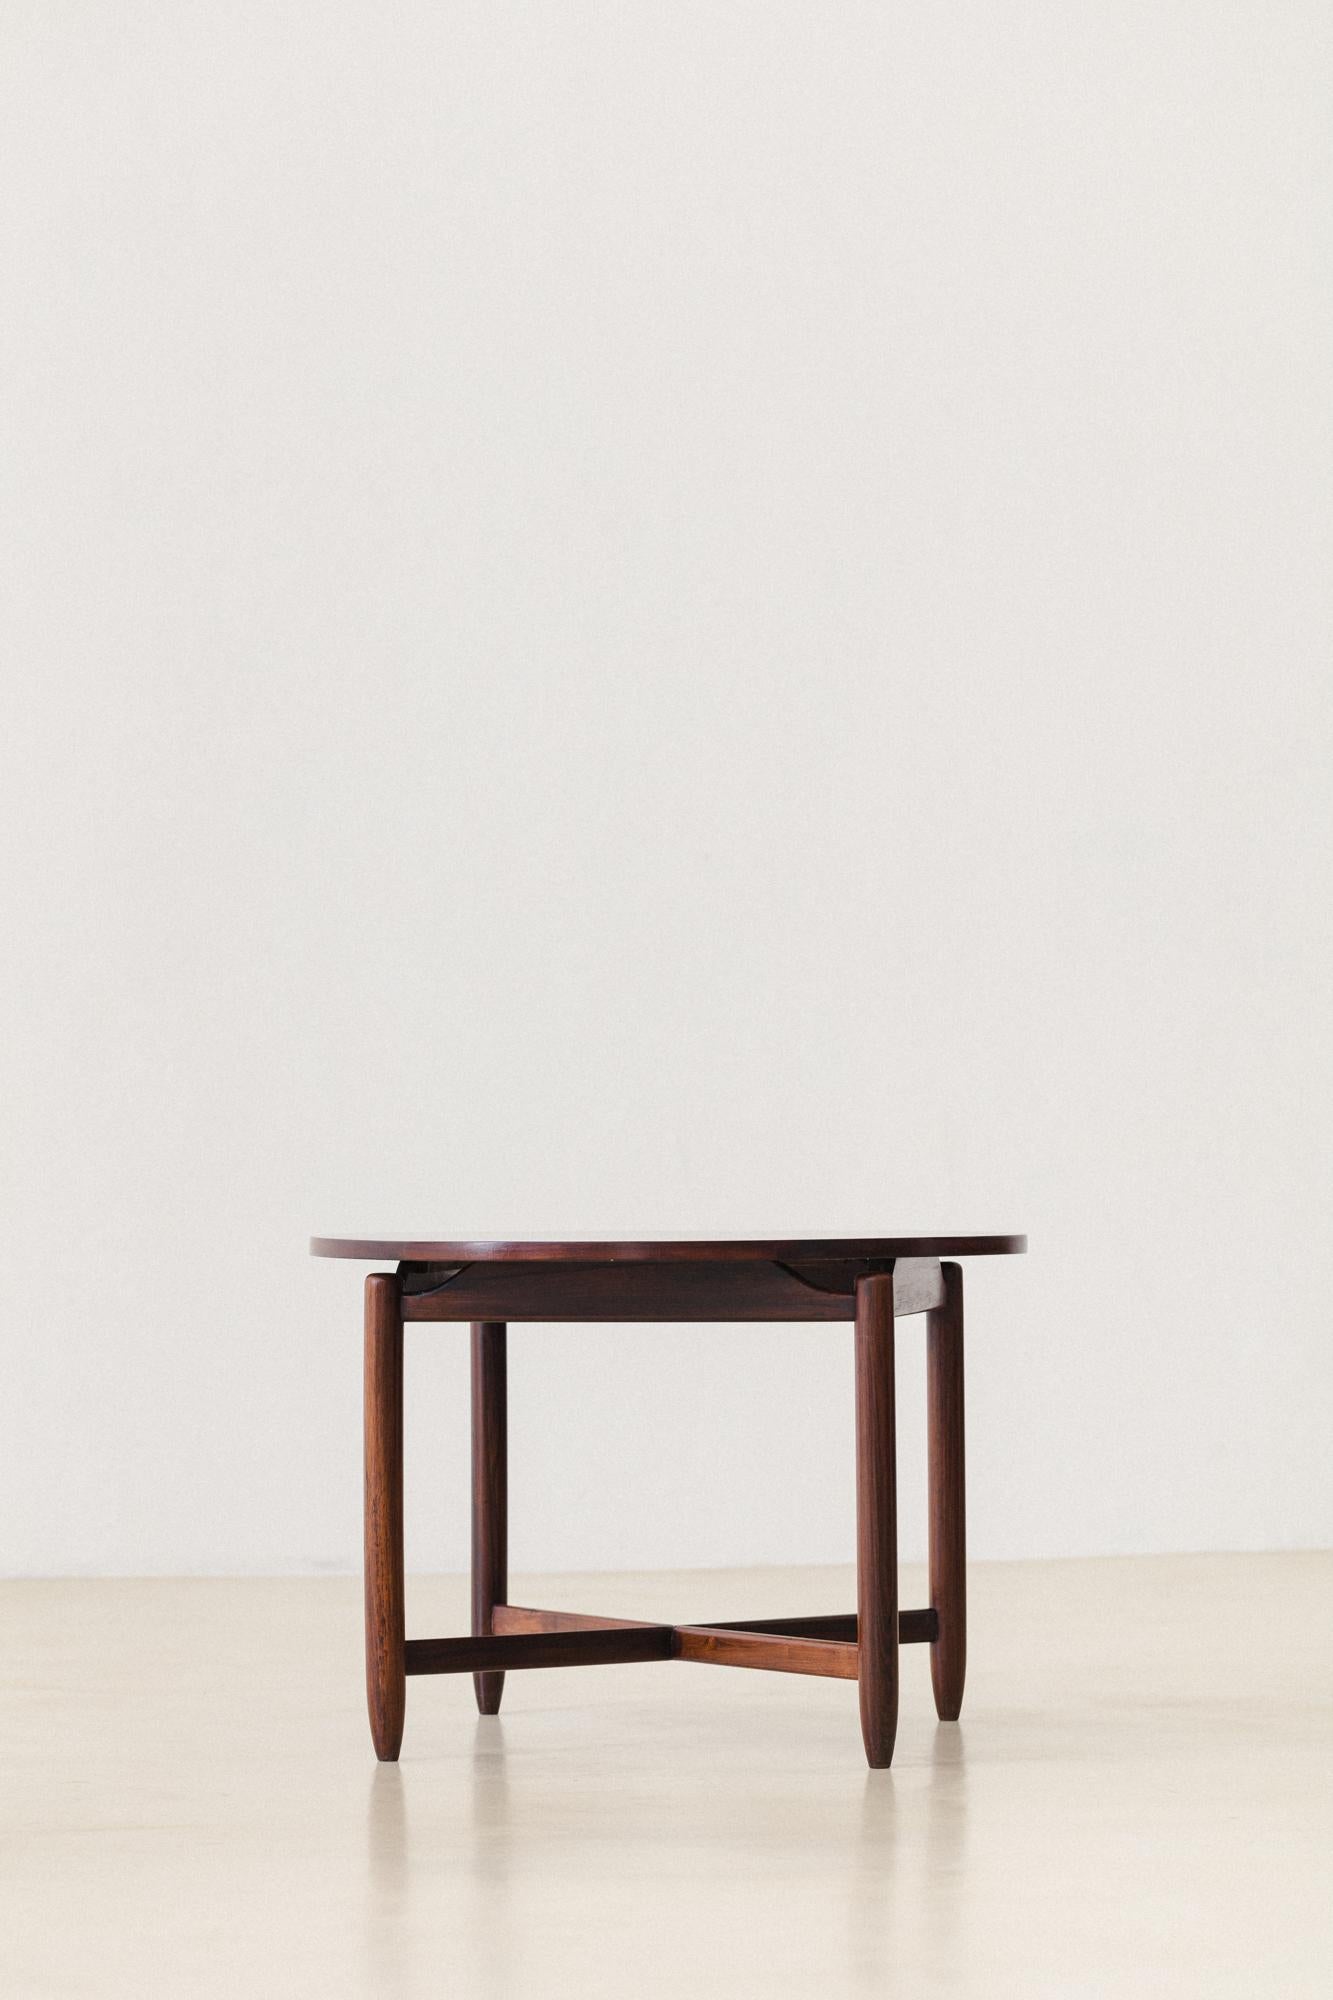 This Side Table was produced by Cantù Móveis e Interiores Ltda. in the 1960s. The piece is made of a solid Rosewood structure with a round veneered top. The simple design is highlighted by beautiful details: the legs don't touch the tops and are fit